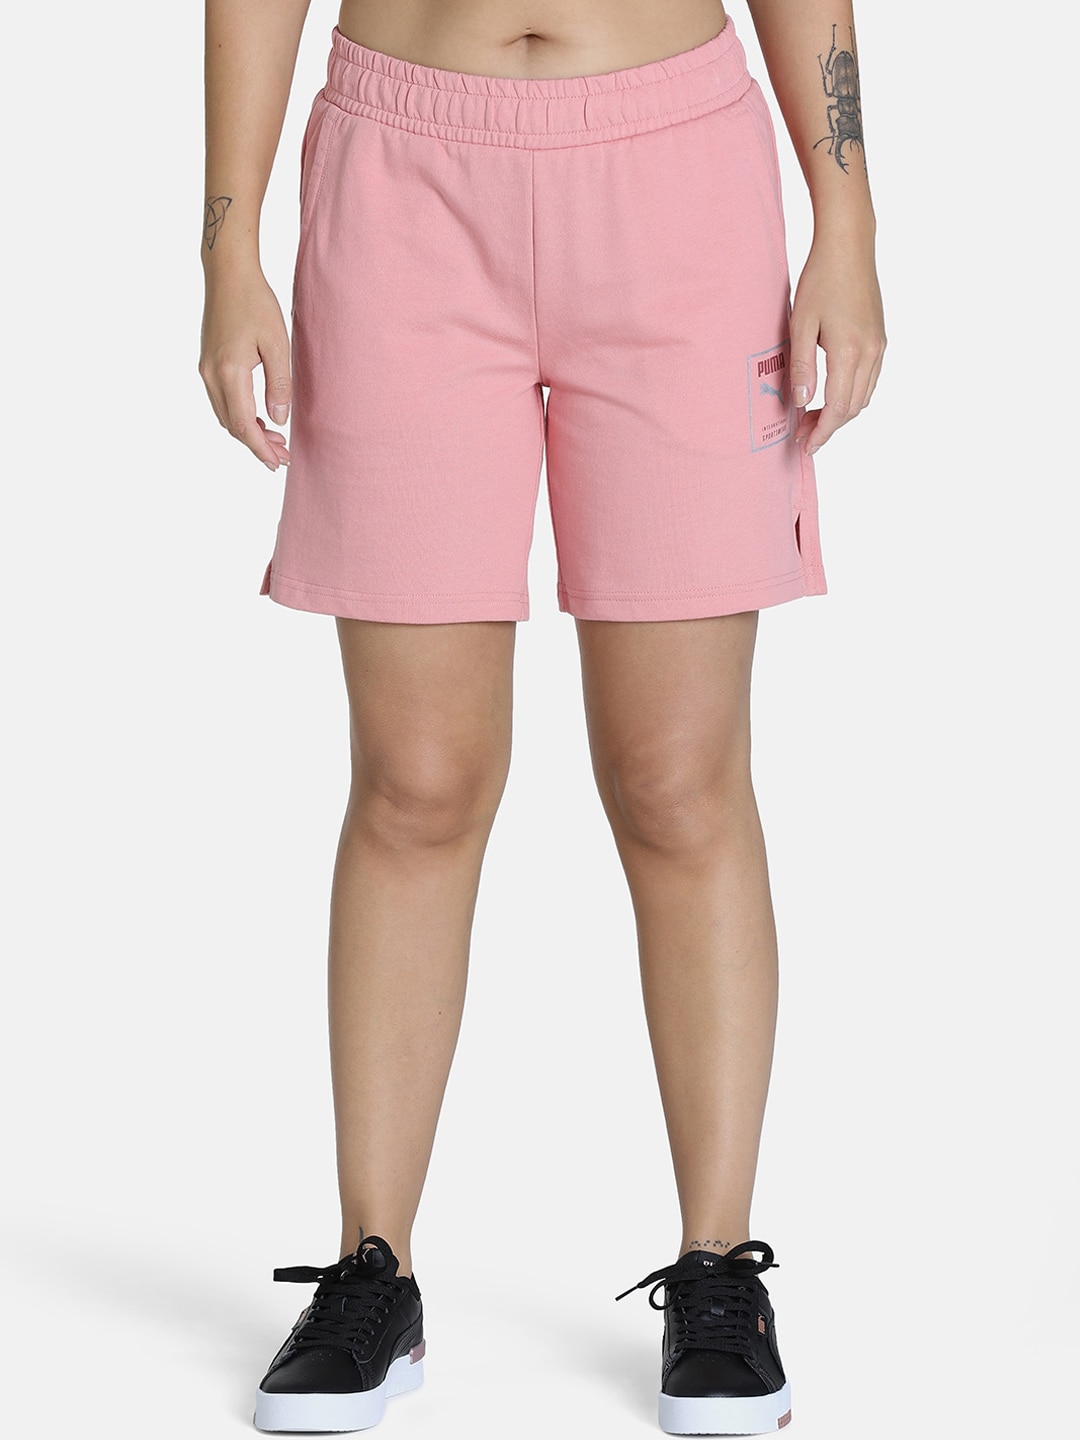 Puma Women Pink Solid Cotton Slim-Fit Shorts Price in India